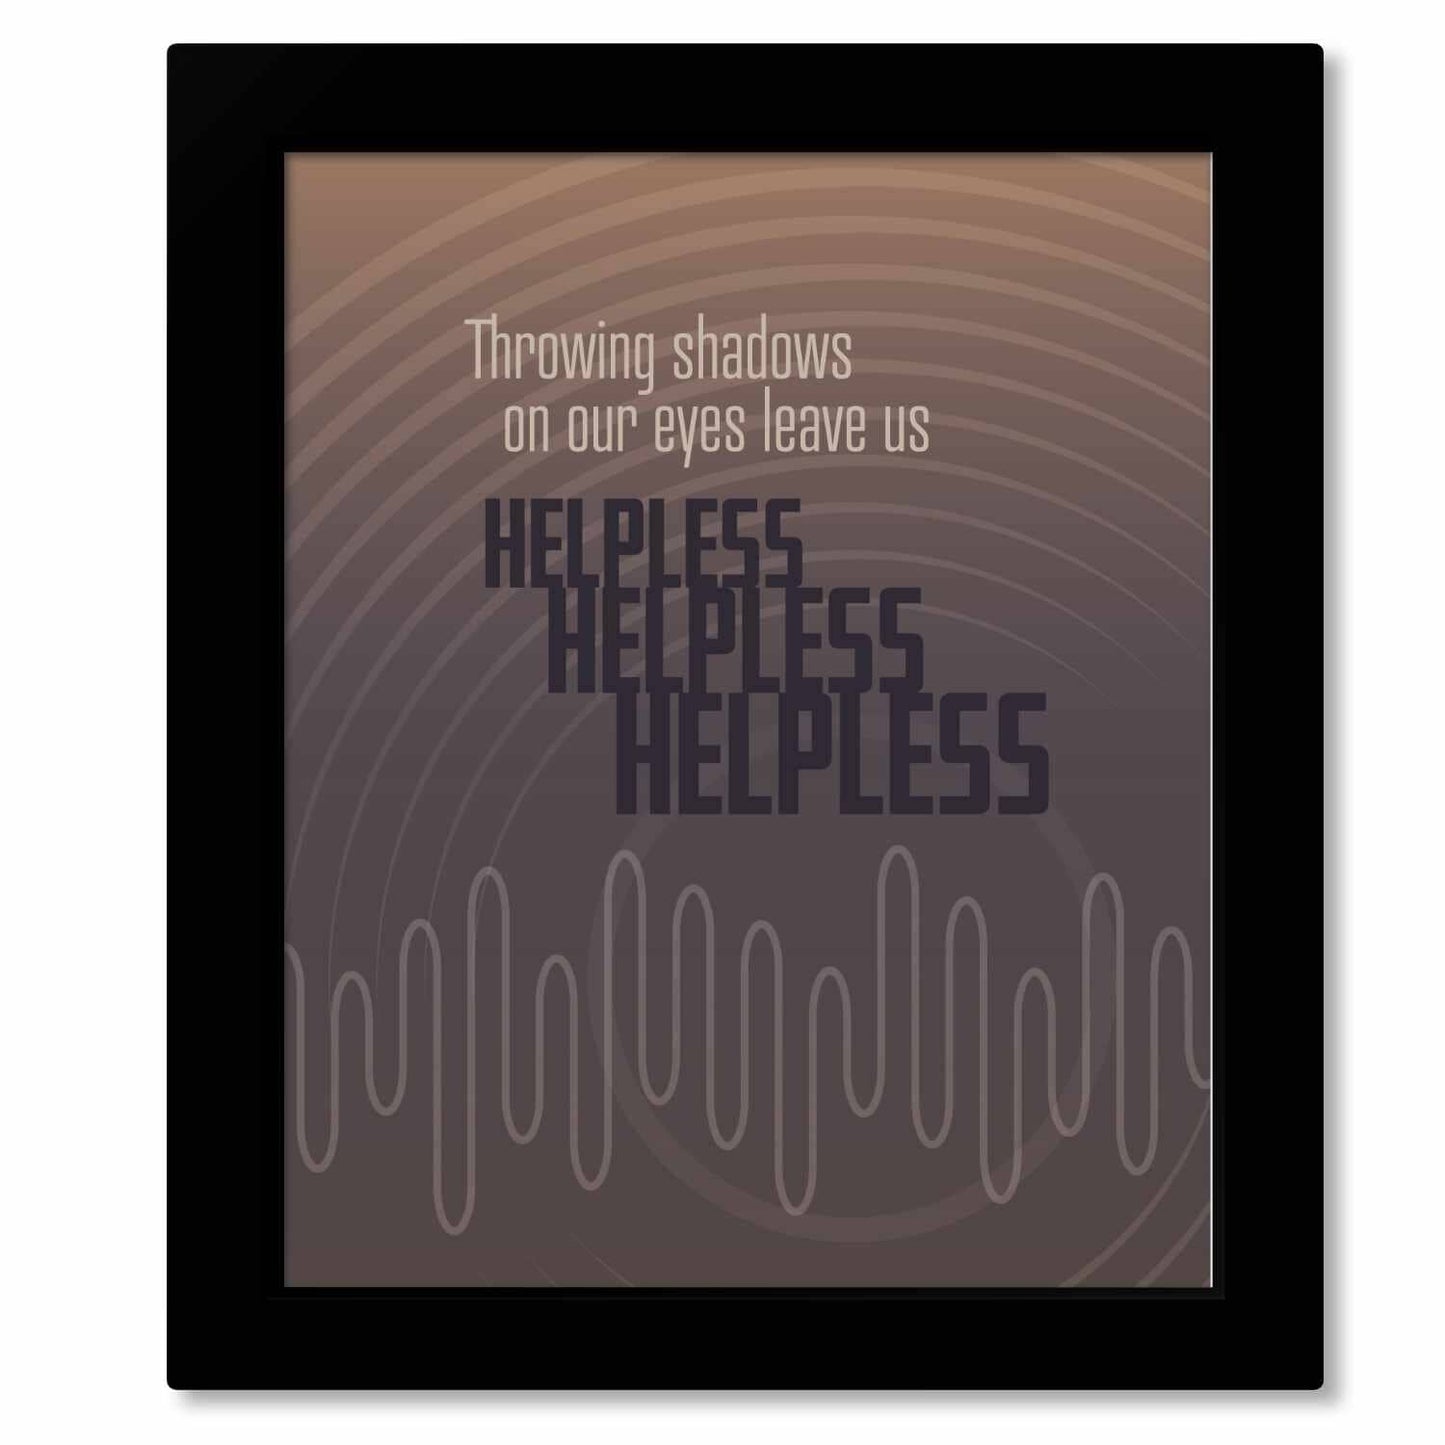 Helpless by Neil Young - Music Gift Song Lyric Wall Decor Song Lyrics Art Song Lyrics Art 8x10 framed print without Mat 